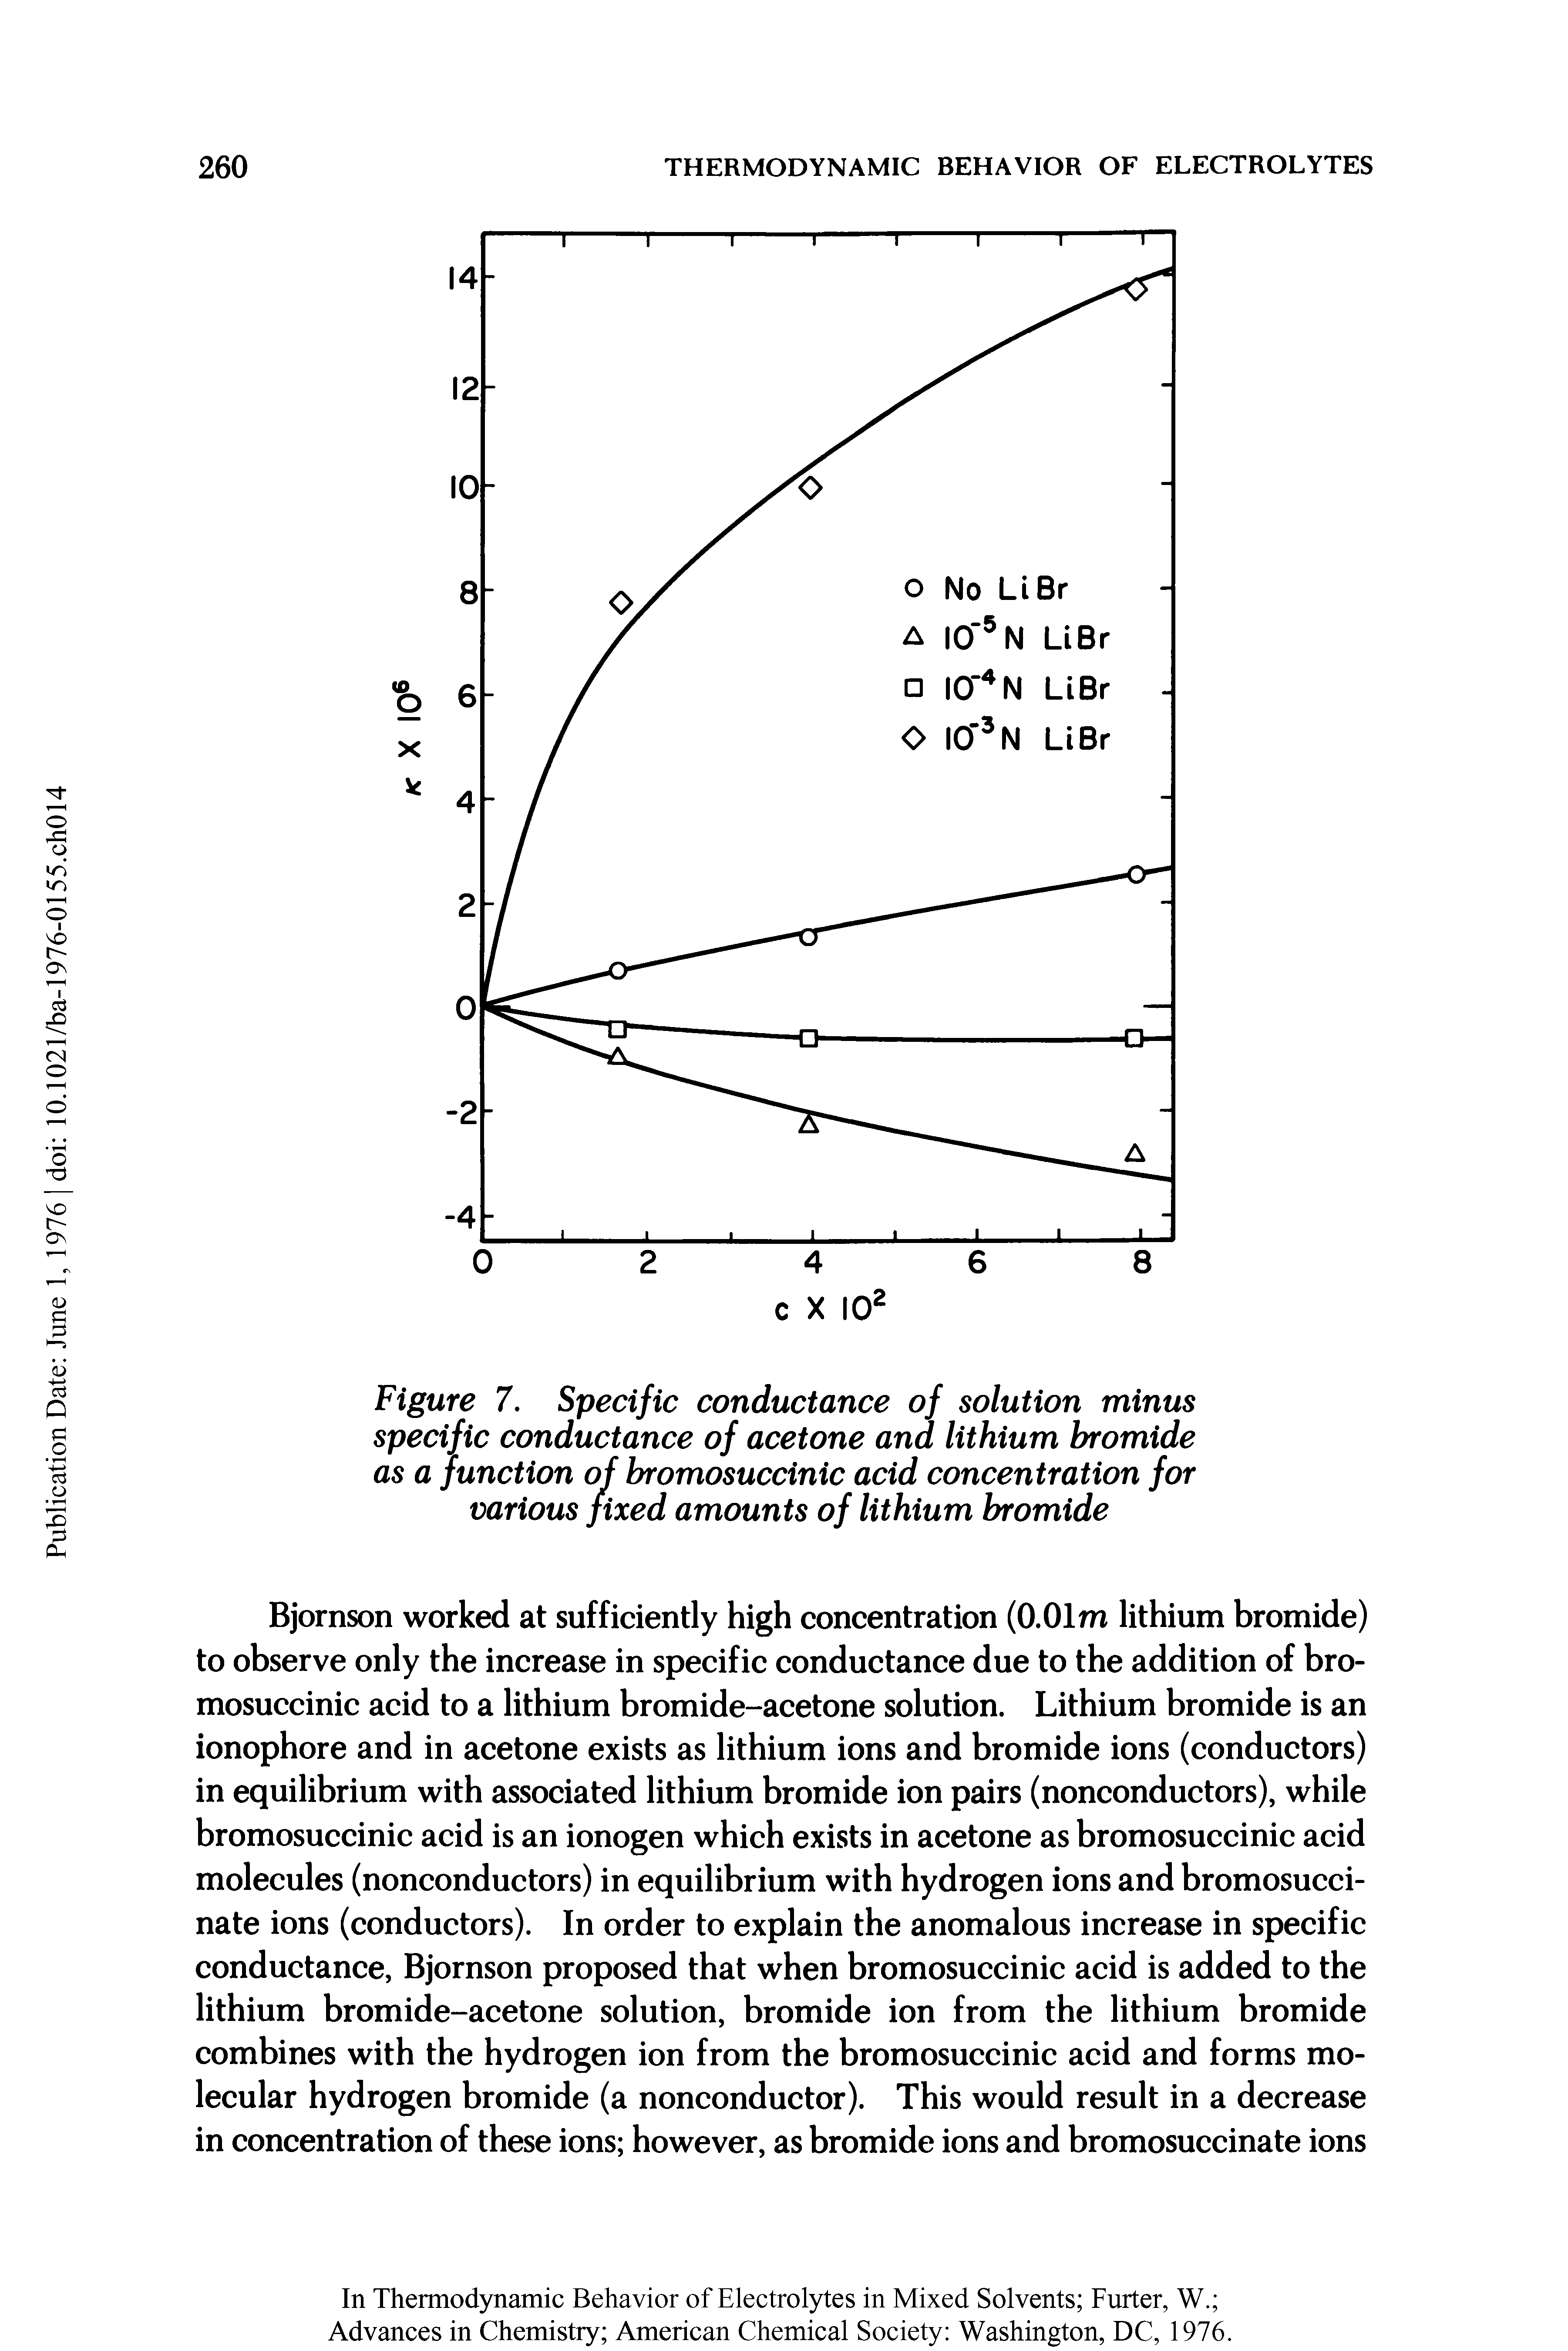 Figure 7. Specific conductance of solution minus specific conductance of acetone and lithium bromide as a function of bromosuccinic acid concentration for various fixed amounts of lithium bromide...